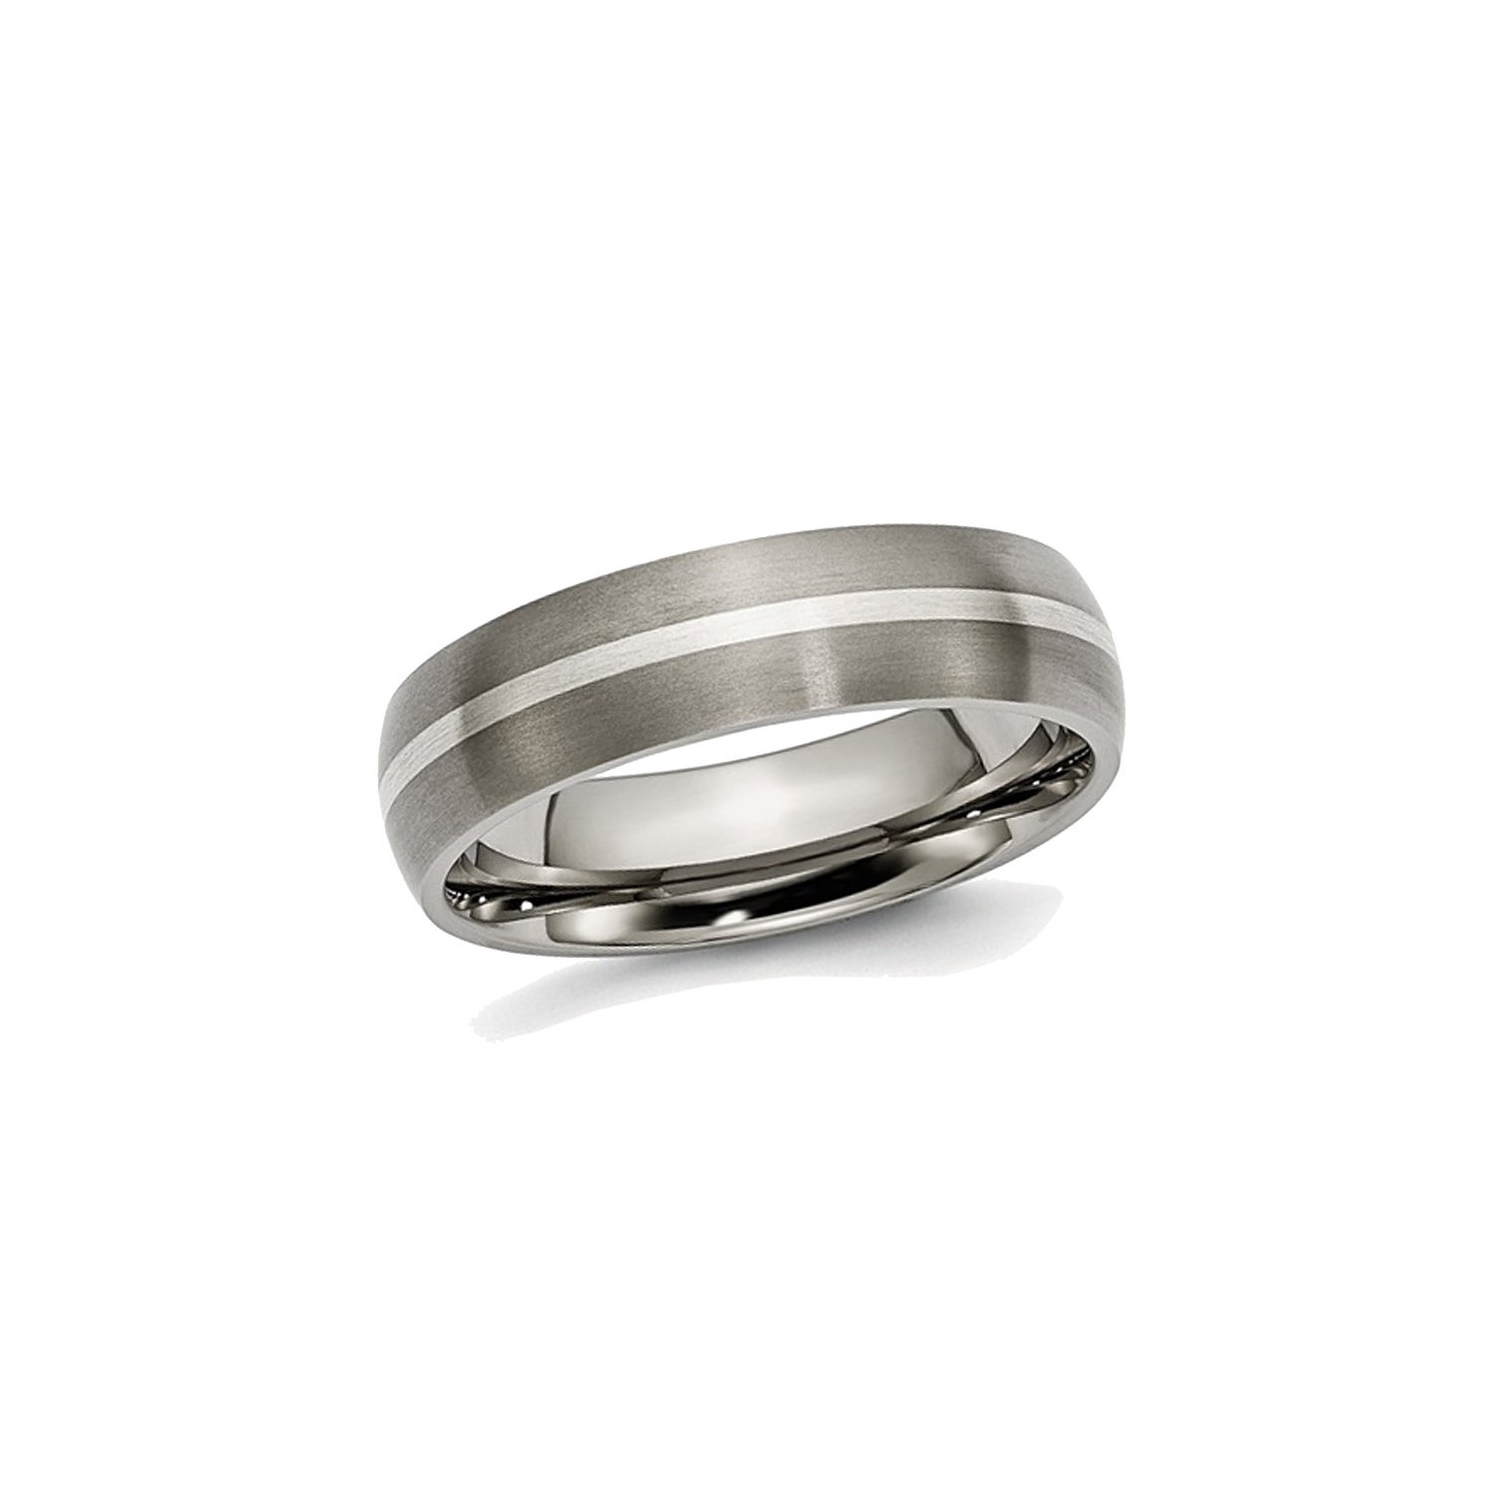 Best Designer Jewelry Titanium Sterling Silver Inlay 6mm Brushed Band